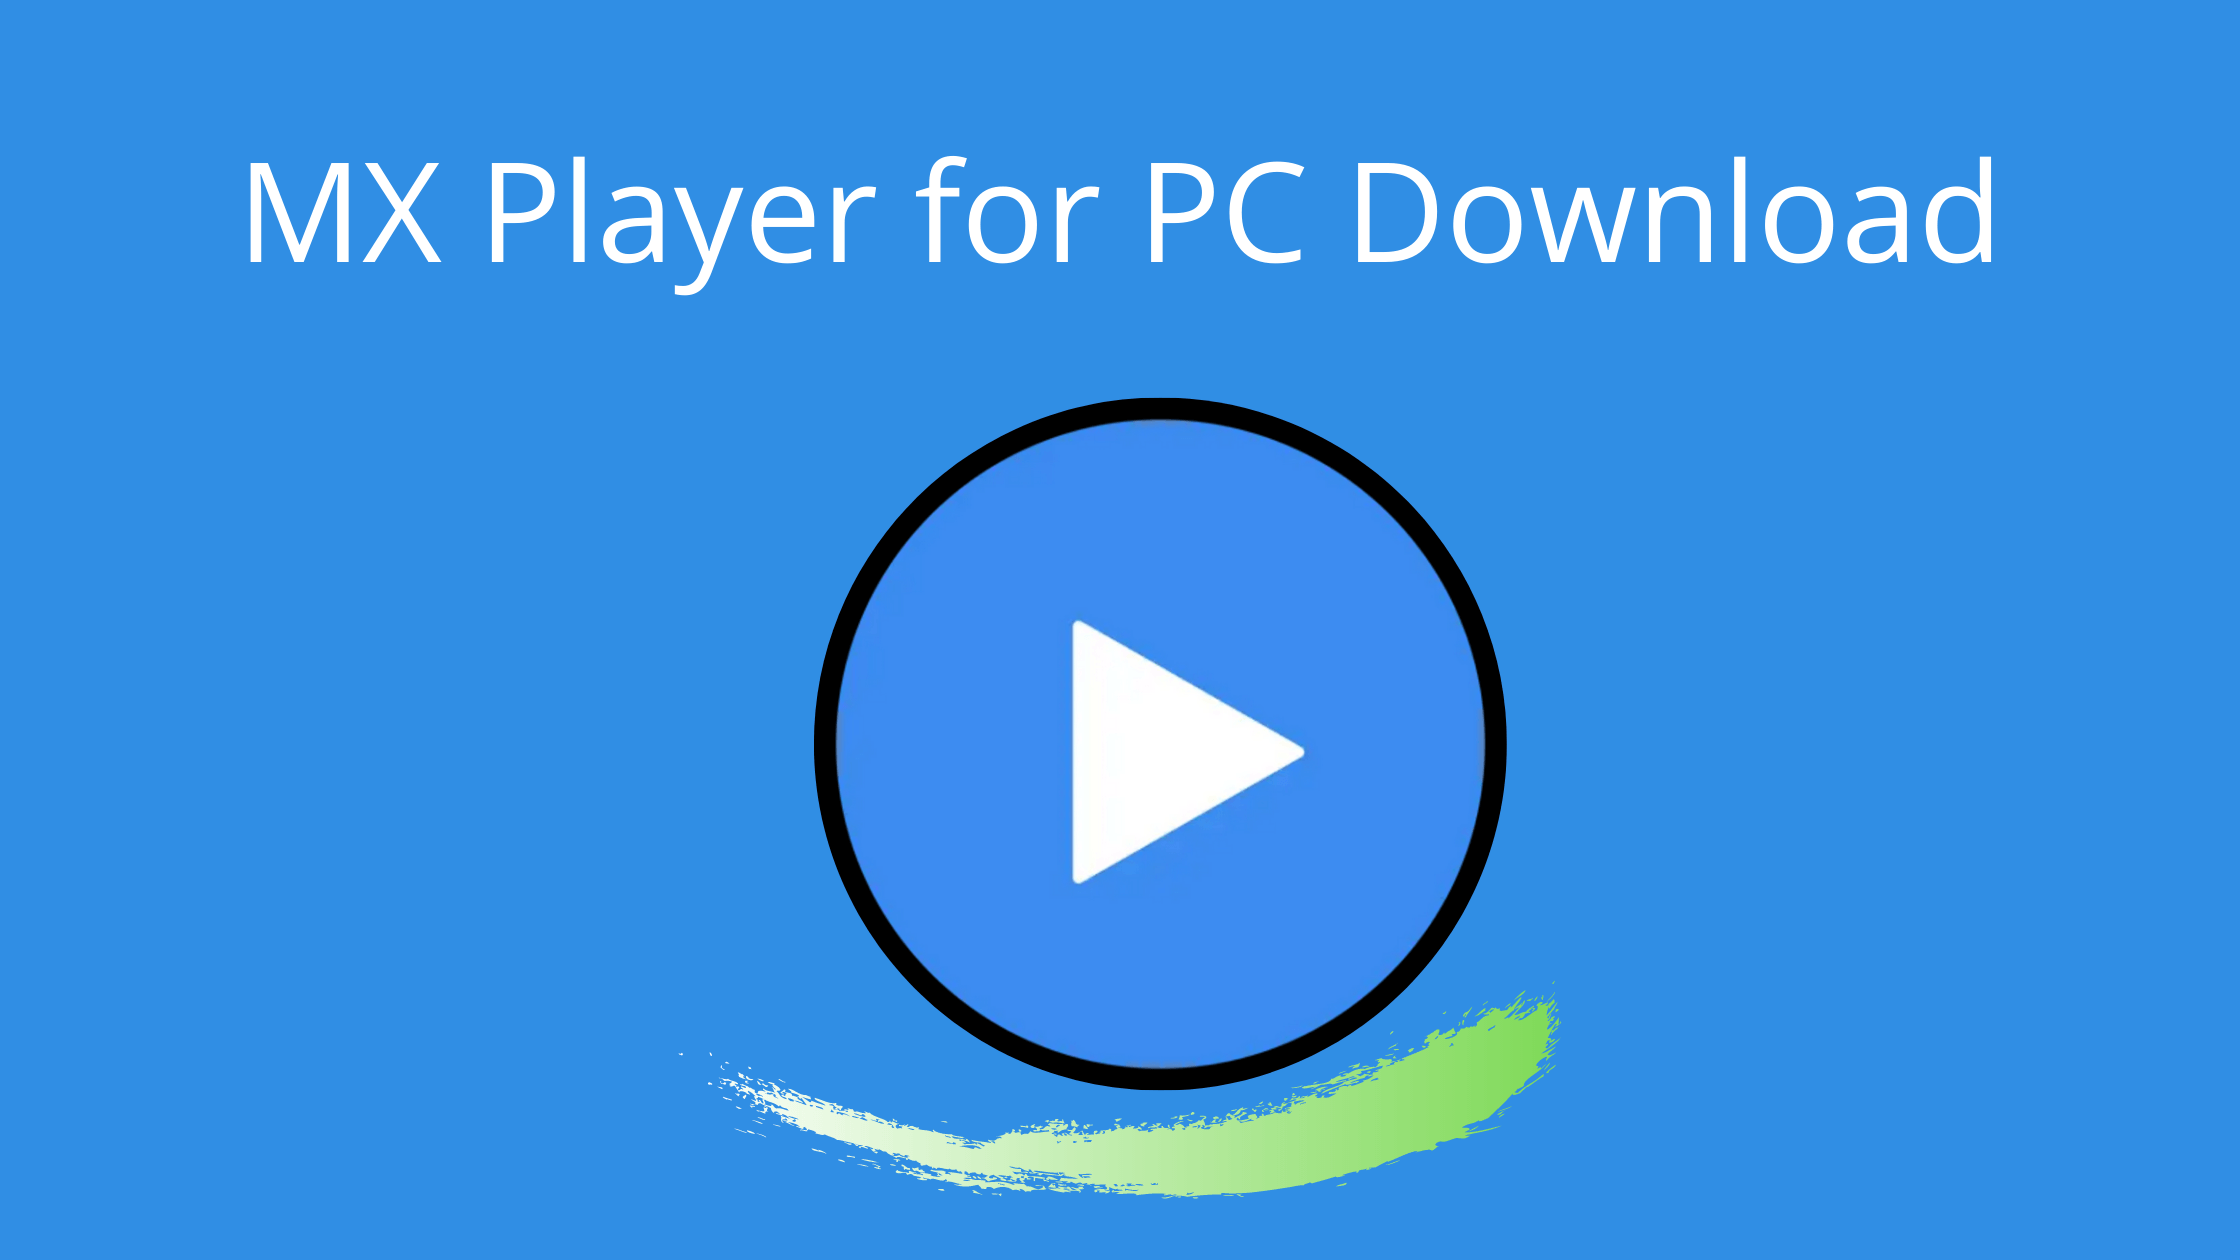 xyz player for pc